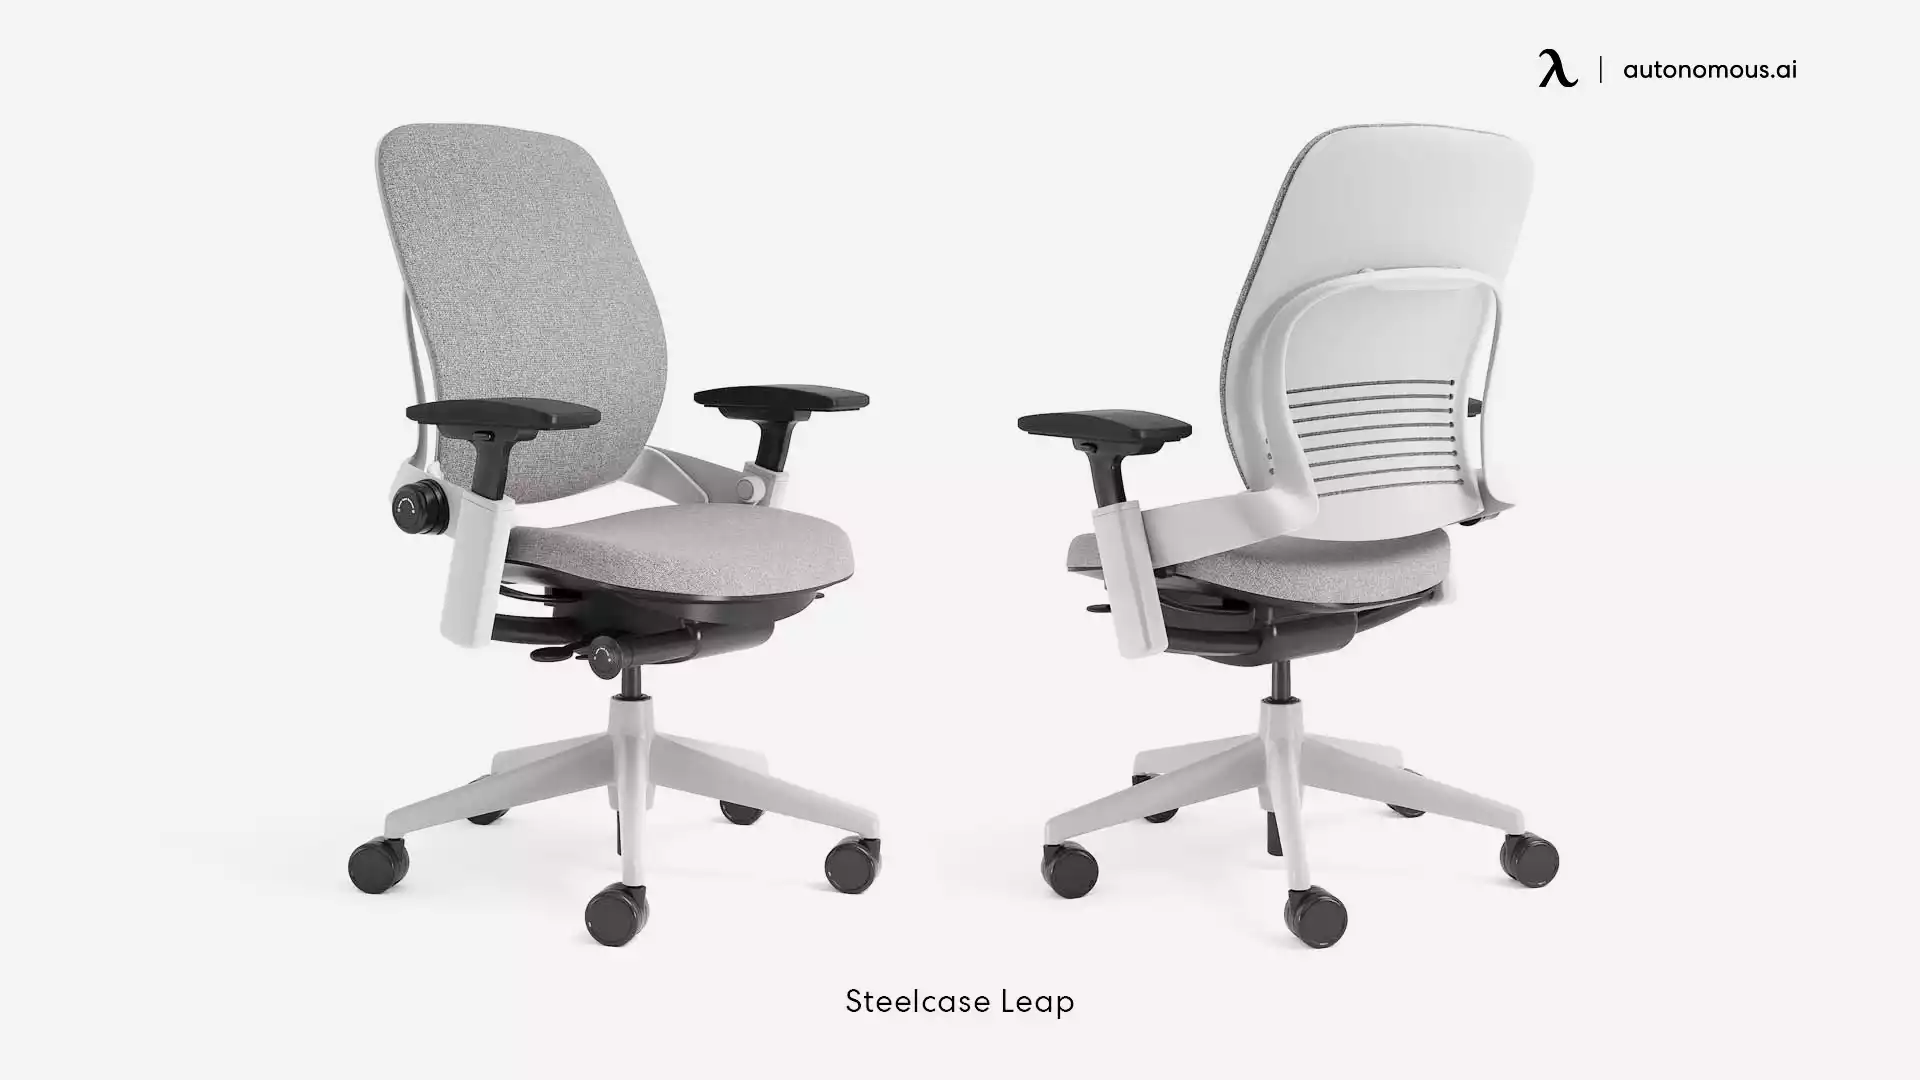 Steelcase Leap Office Chair- best office chair under 500